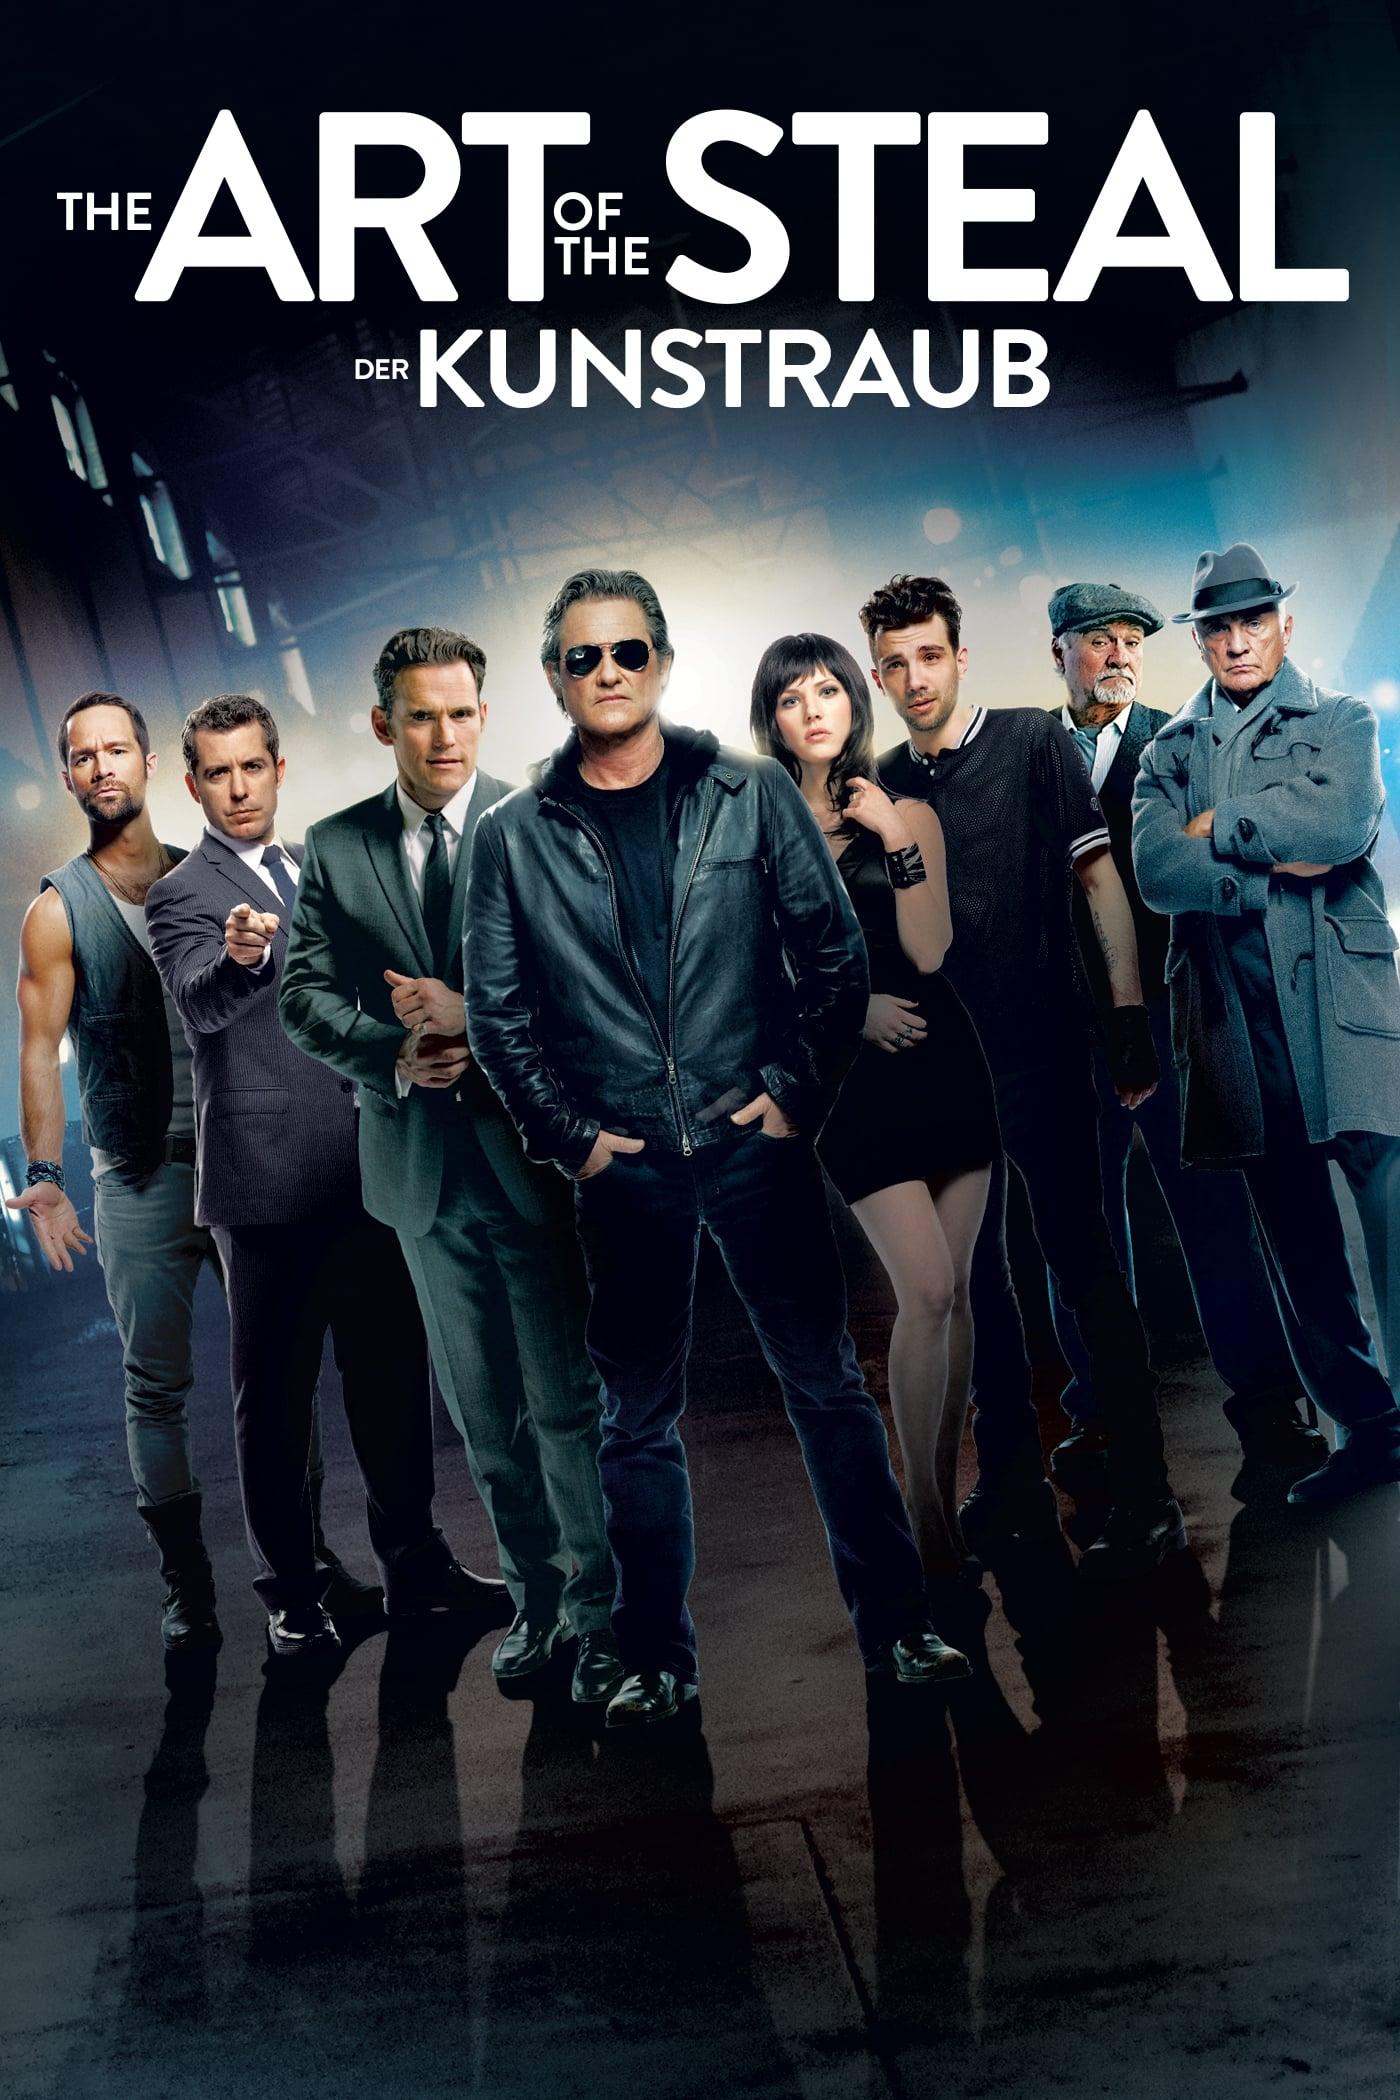 The Art of the Steal - Der Kunstraub poster